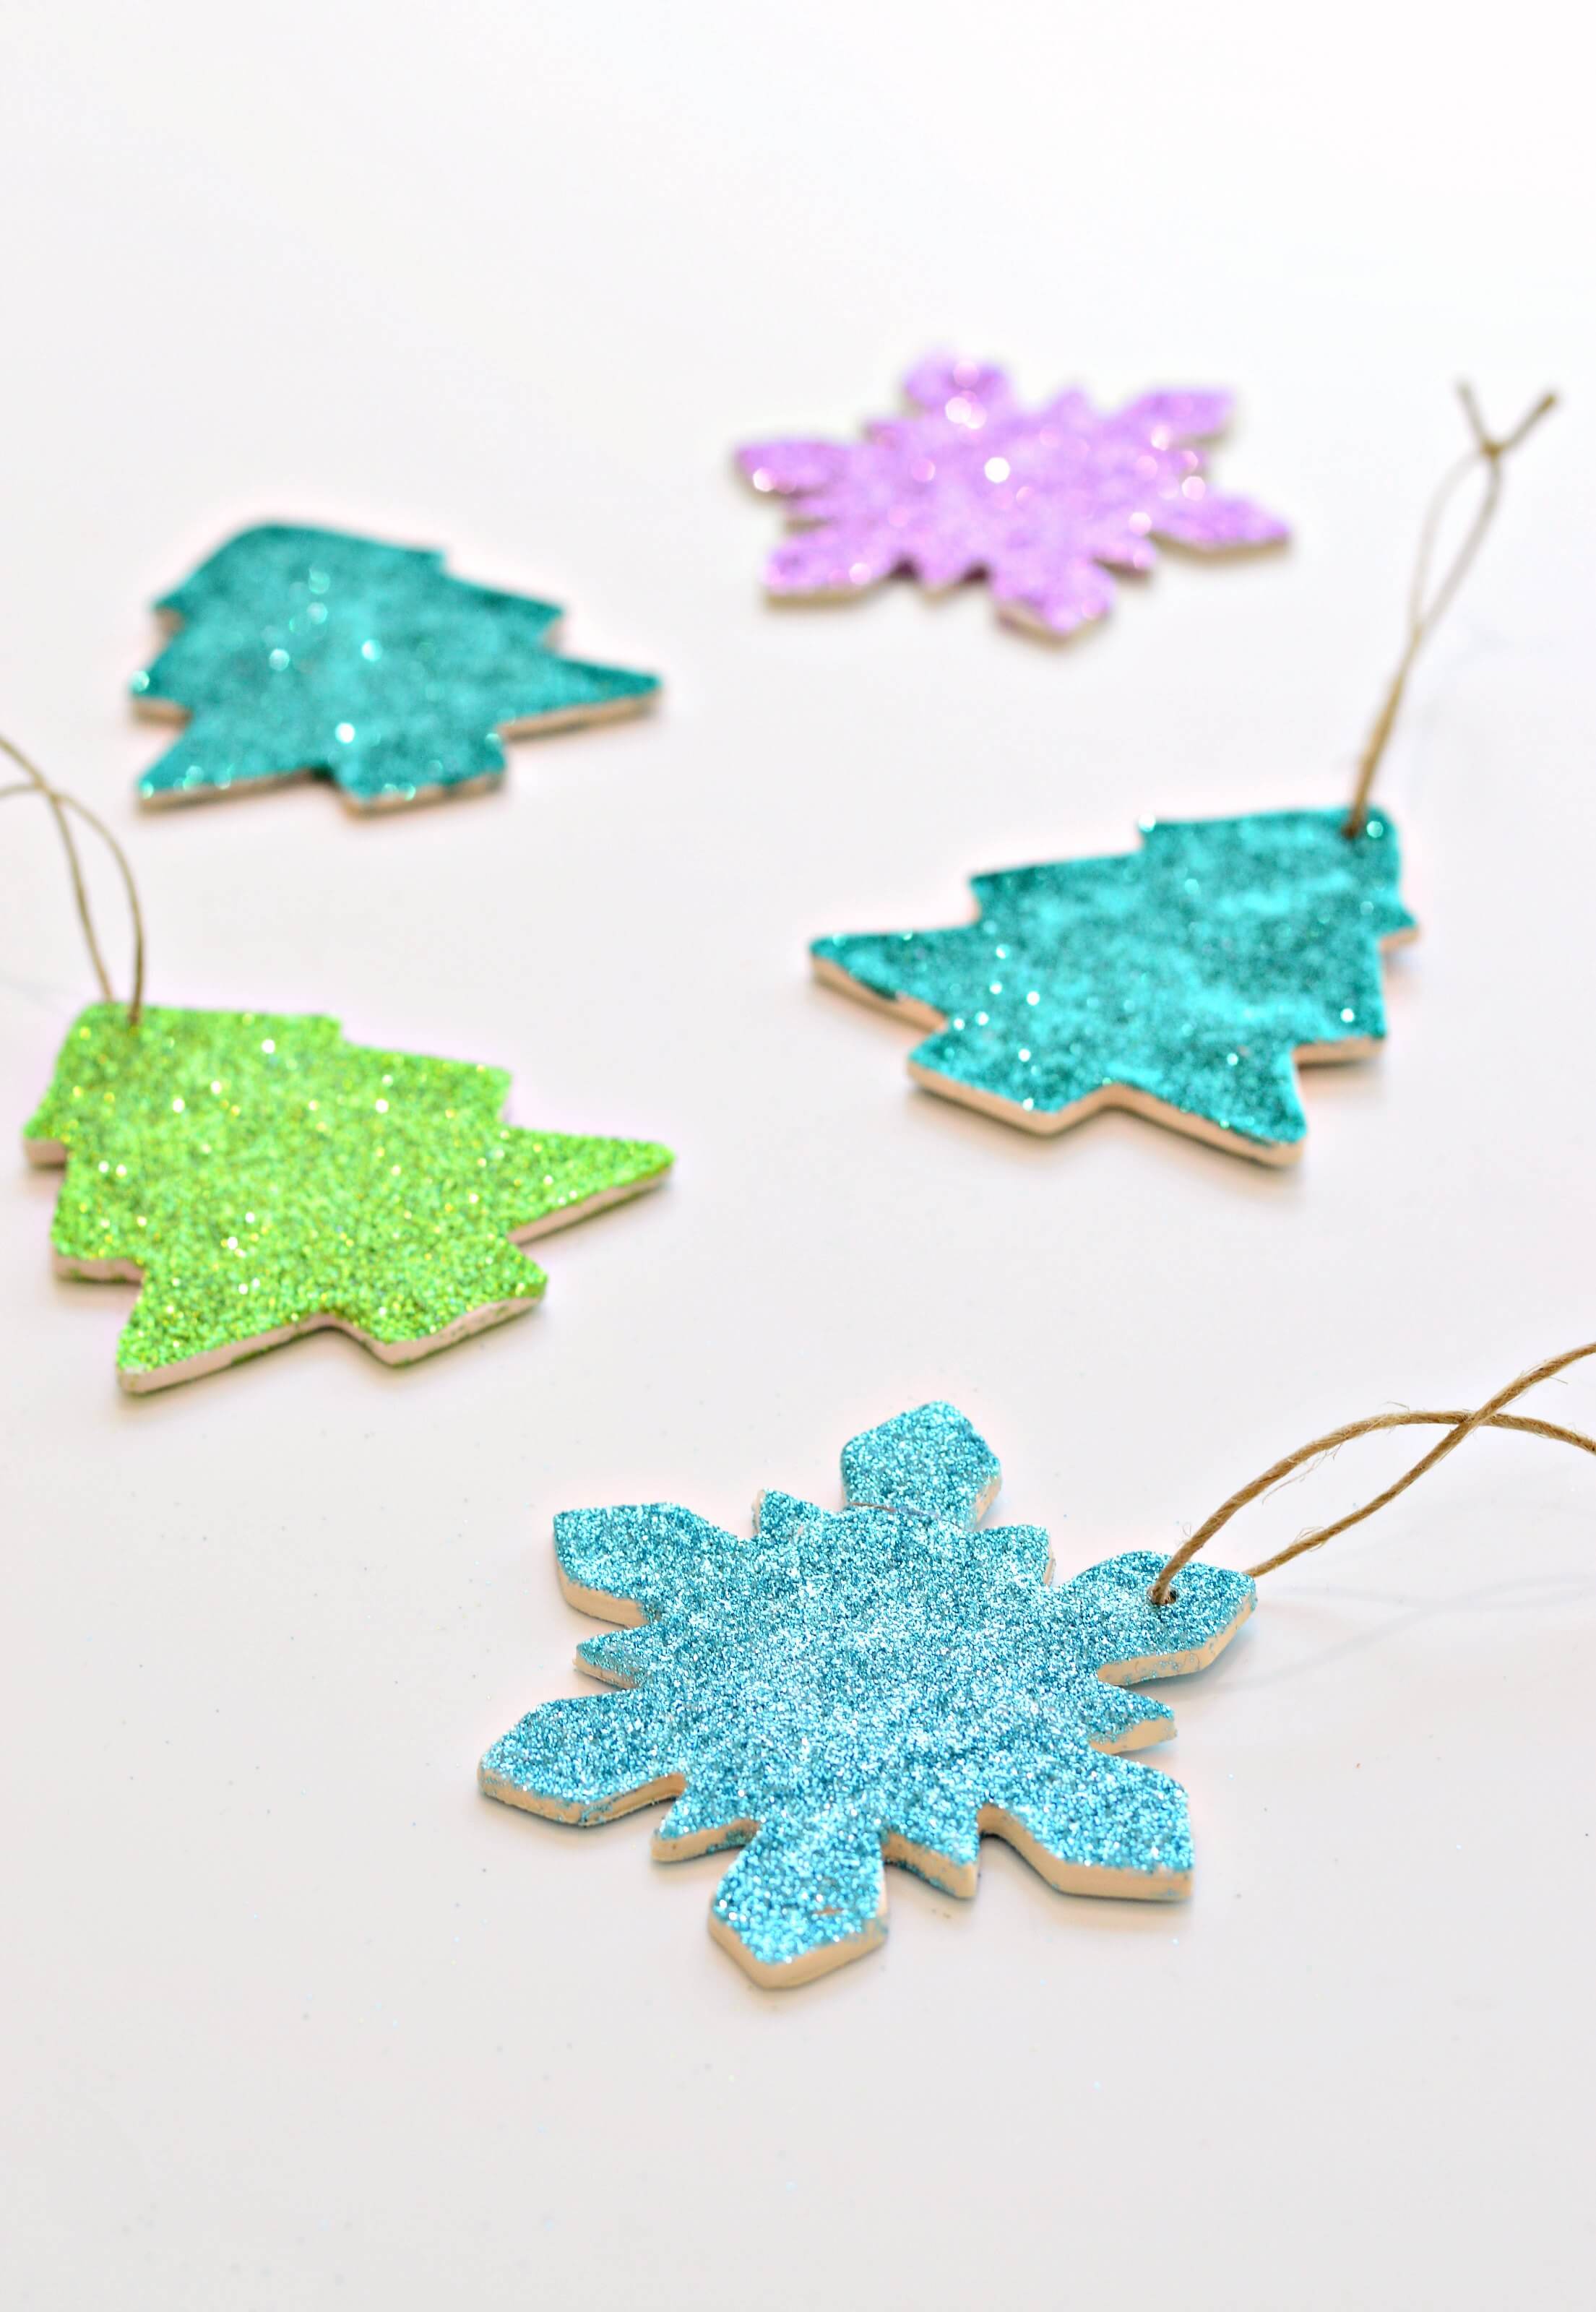 Glitter snowflake ornaments on a white table
